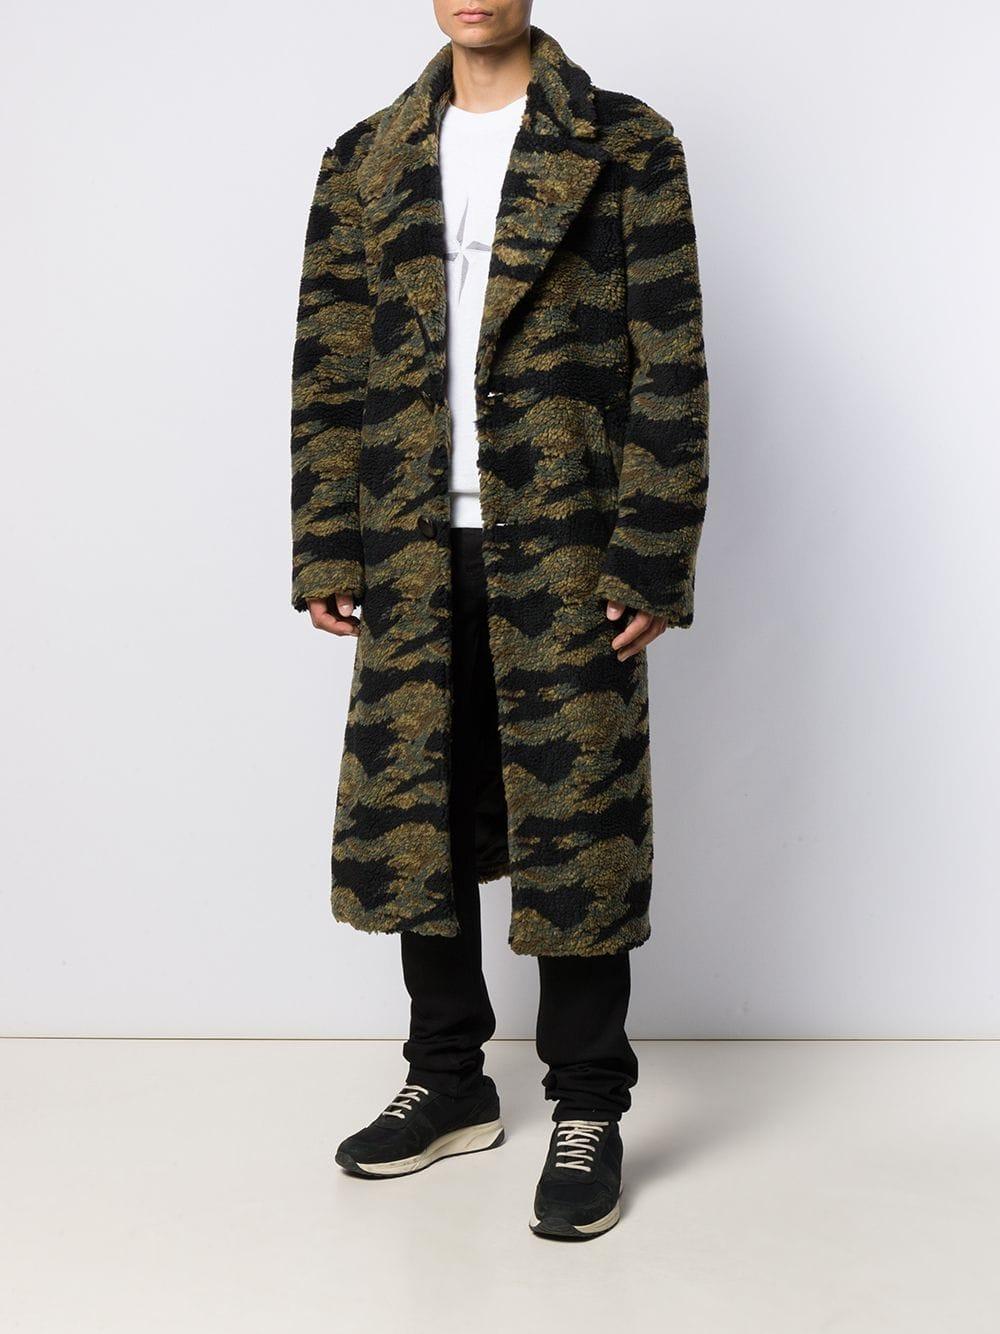 Buscemi Satin Oversized Camouflage Coat in Green for Men - Lyst